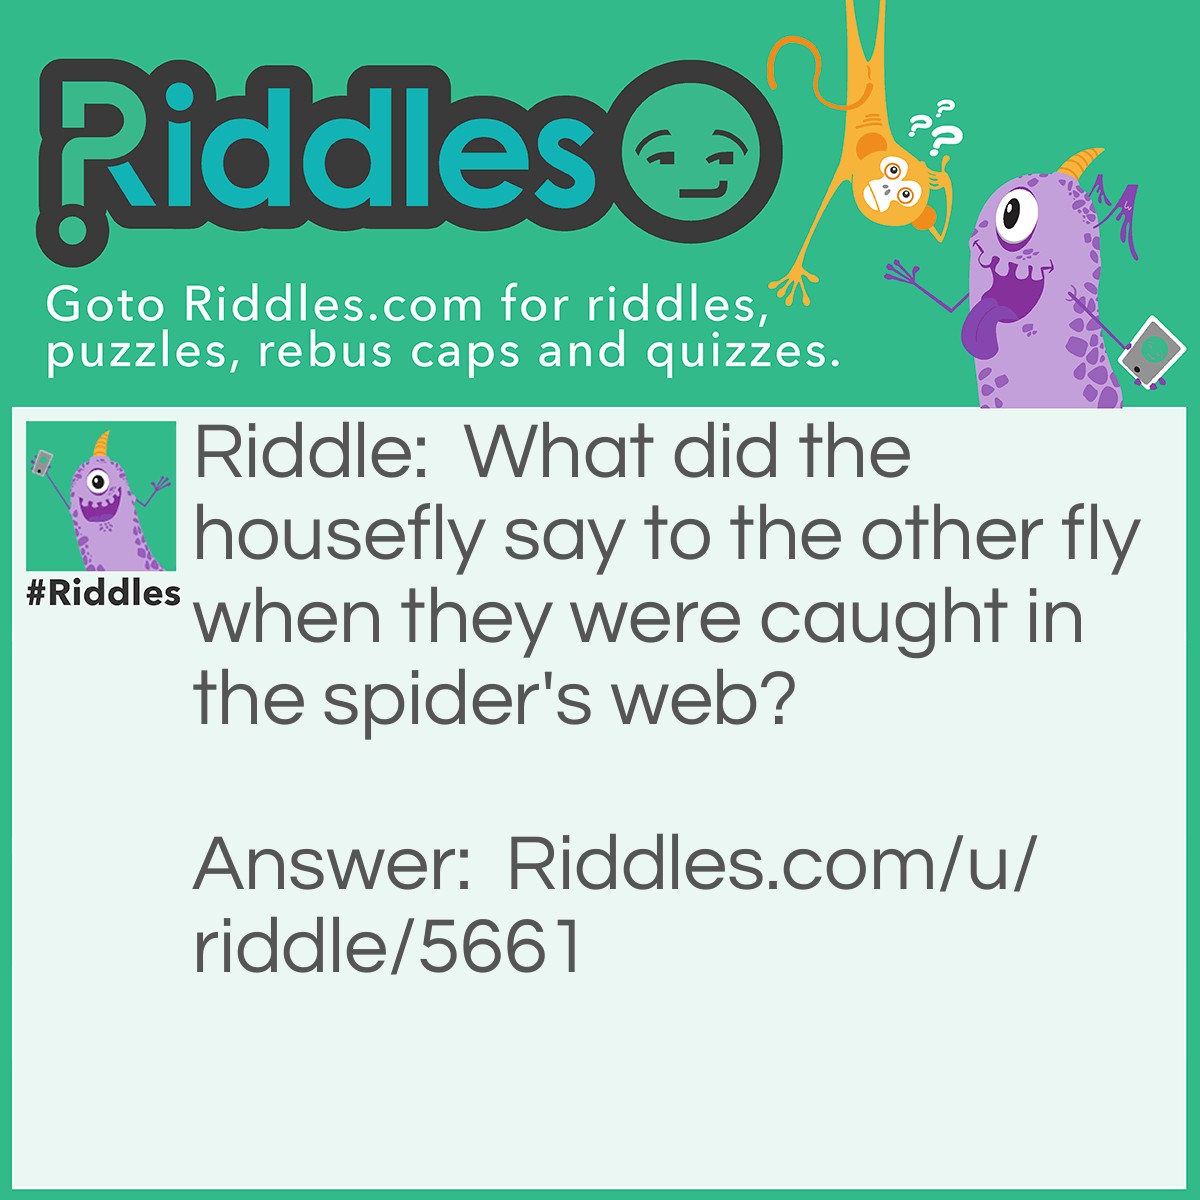 Riddle: What did the housefly say to the other fly when they were caught in the spider's web? Answer: Drag on fly (dragon fly).